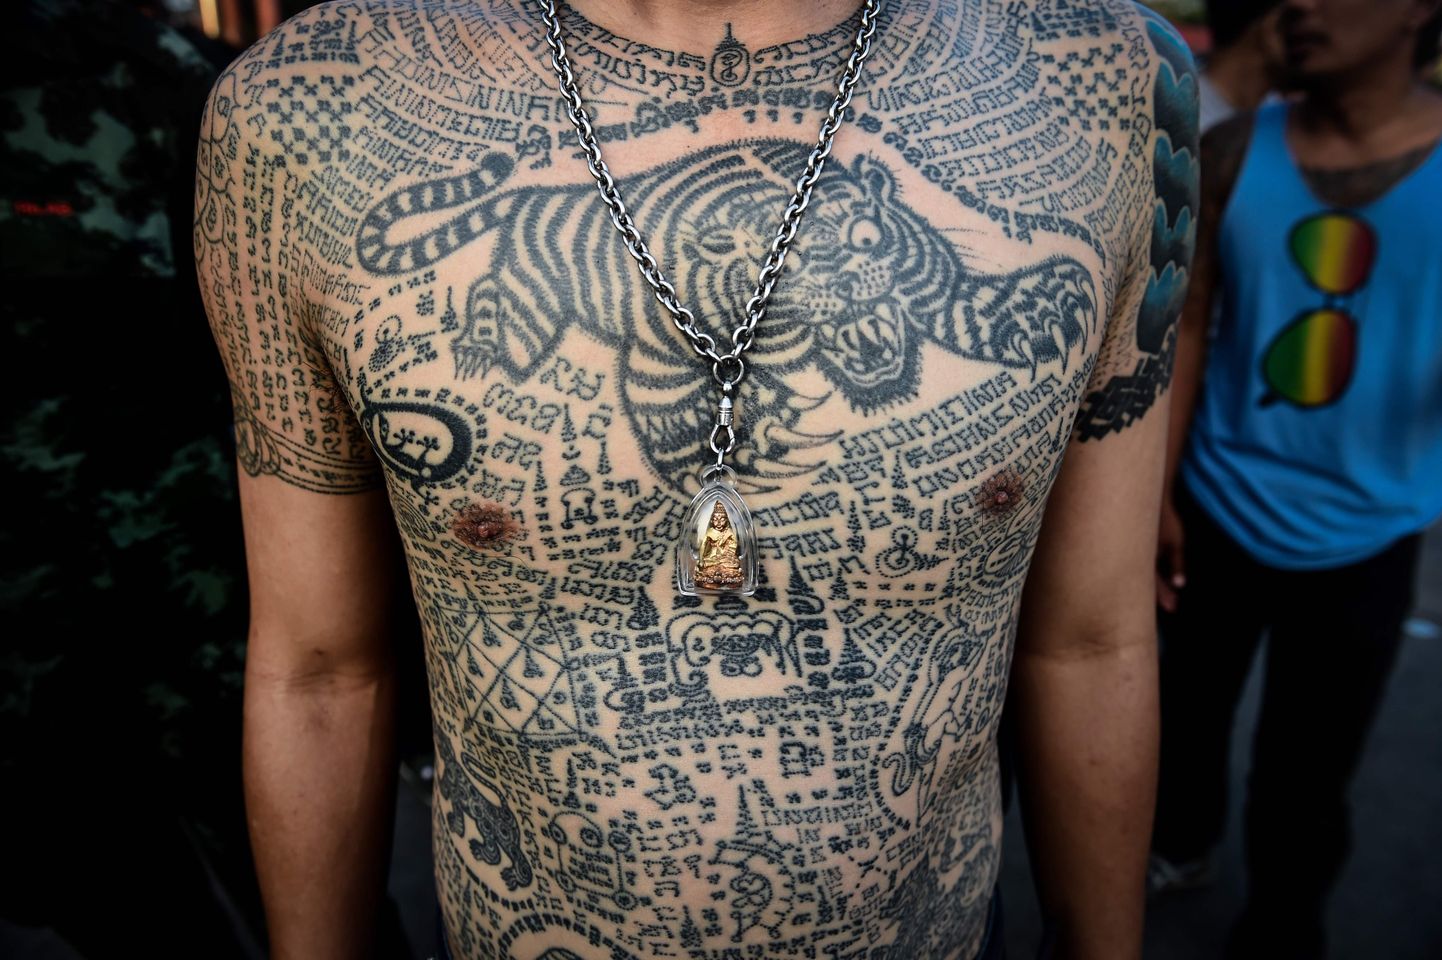 A devotee wears a Buddhist amulet over his tradtional tattoos during an annual sacred tattoo festival, at the Wat Bang Phra temple in Nakhon Chaisi district, Thailand's Nakhon Pathom Province, on March 3, 2018. 
Ever year, thousands of Buddhist devotees gather at Thailand's Wat Bang Phra temple for an annual festival celebrating traditional Sak Yant tattoos, which wearers believe will bring them good luck and protection from harm. / AFP PHOTO / LILLIAN SUWANRUMPHA